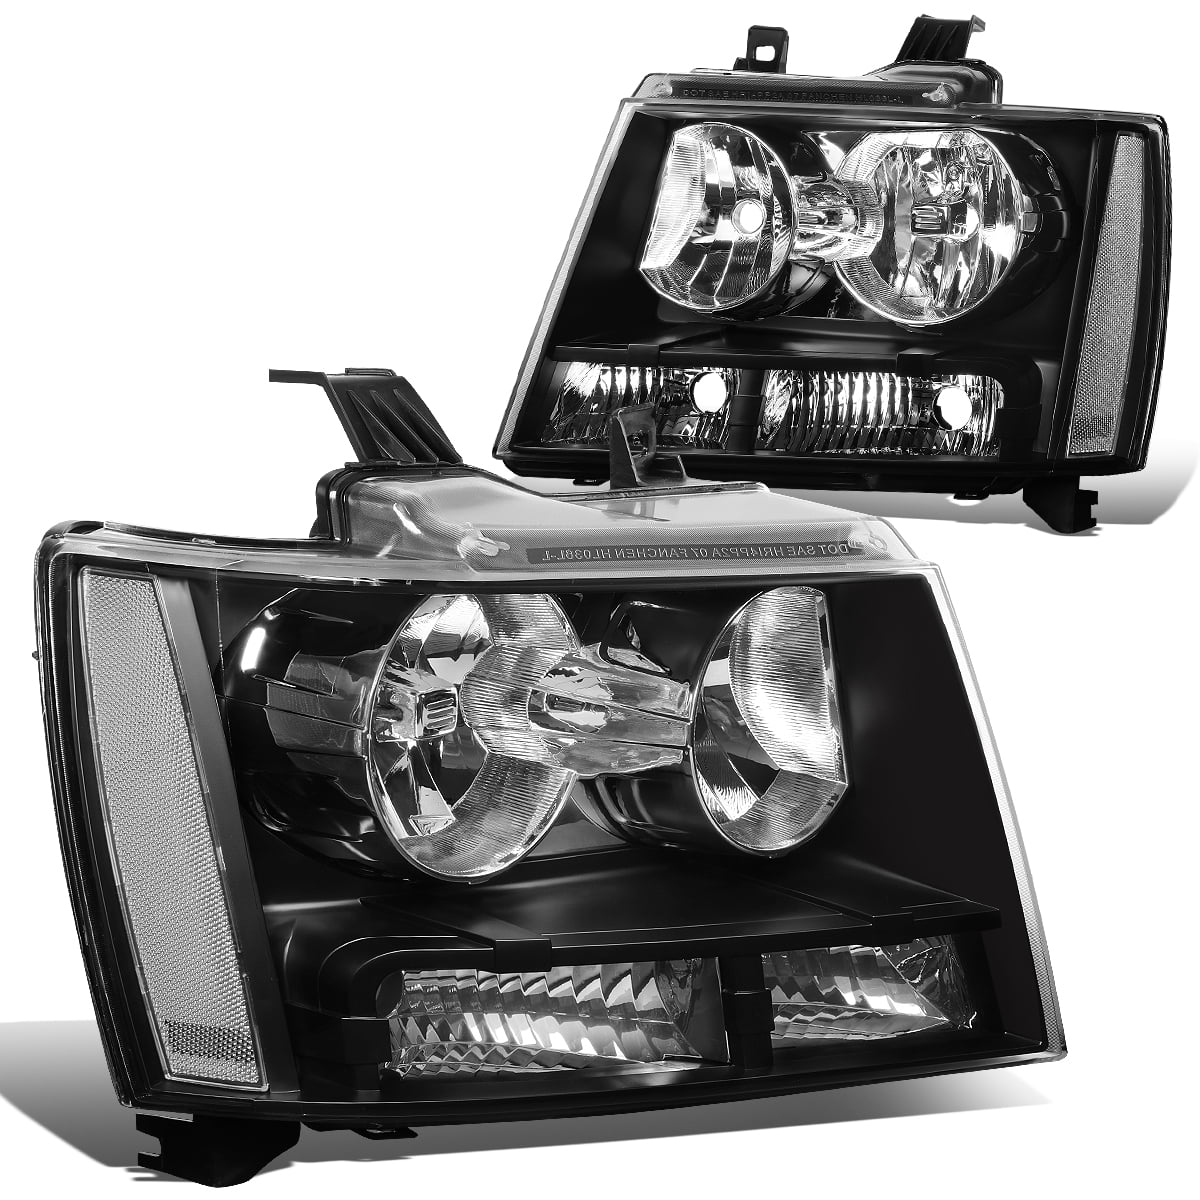 Pair of Black Housing Amber Corner Headlight Assembly Lamps Replacement for Chevy Tahoe Suburban Avalanche 07-14 